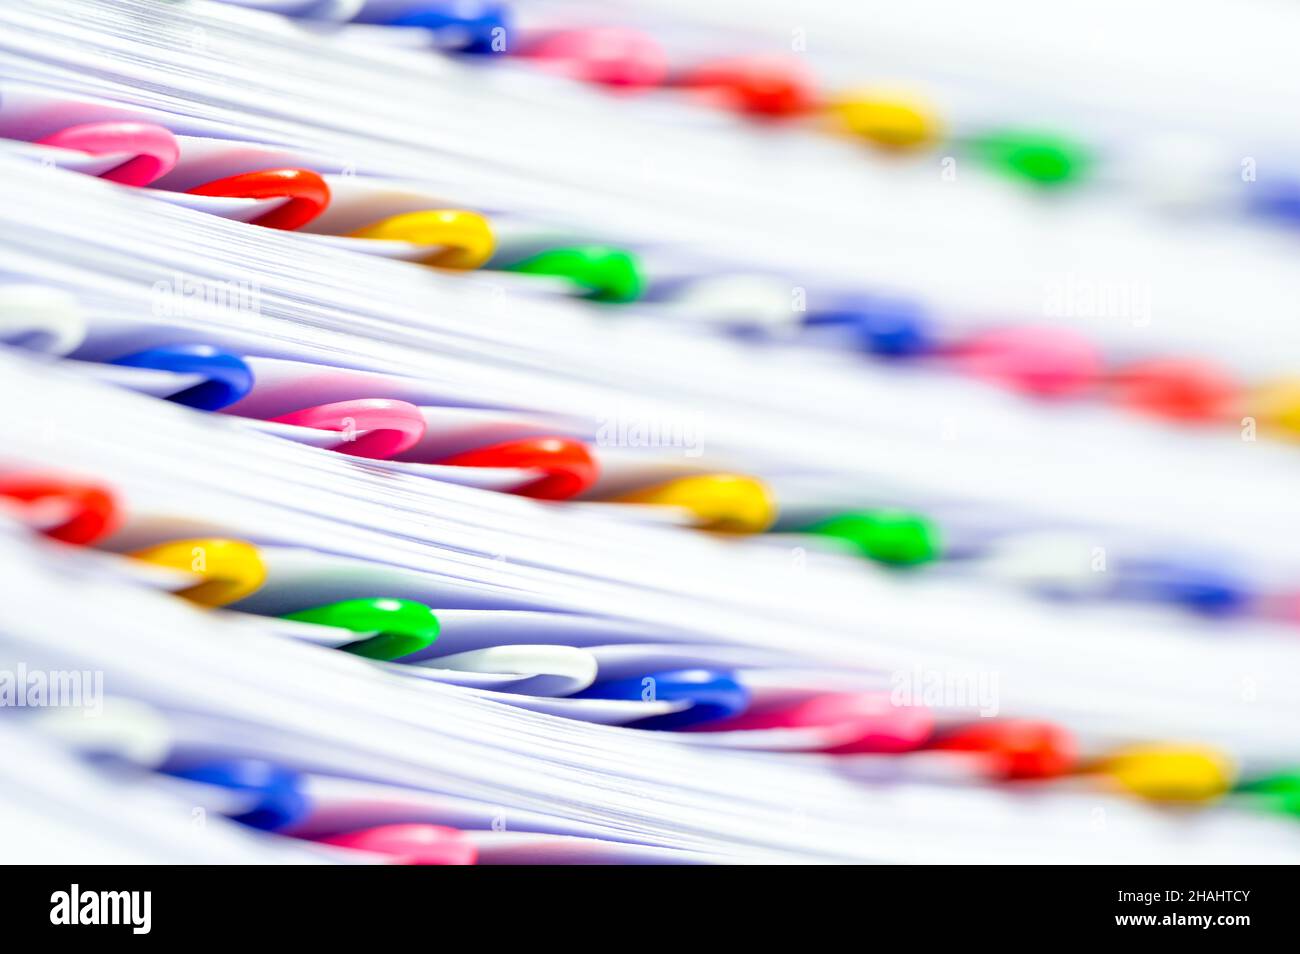 Office work, bureaucracy or red tape concept. Colorful paperclips in a stack of files and papers. Stock Photo